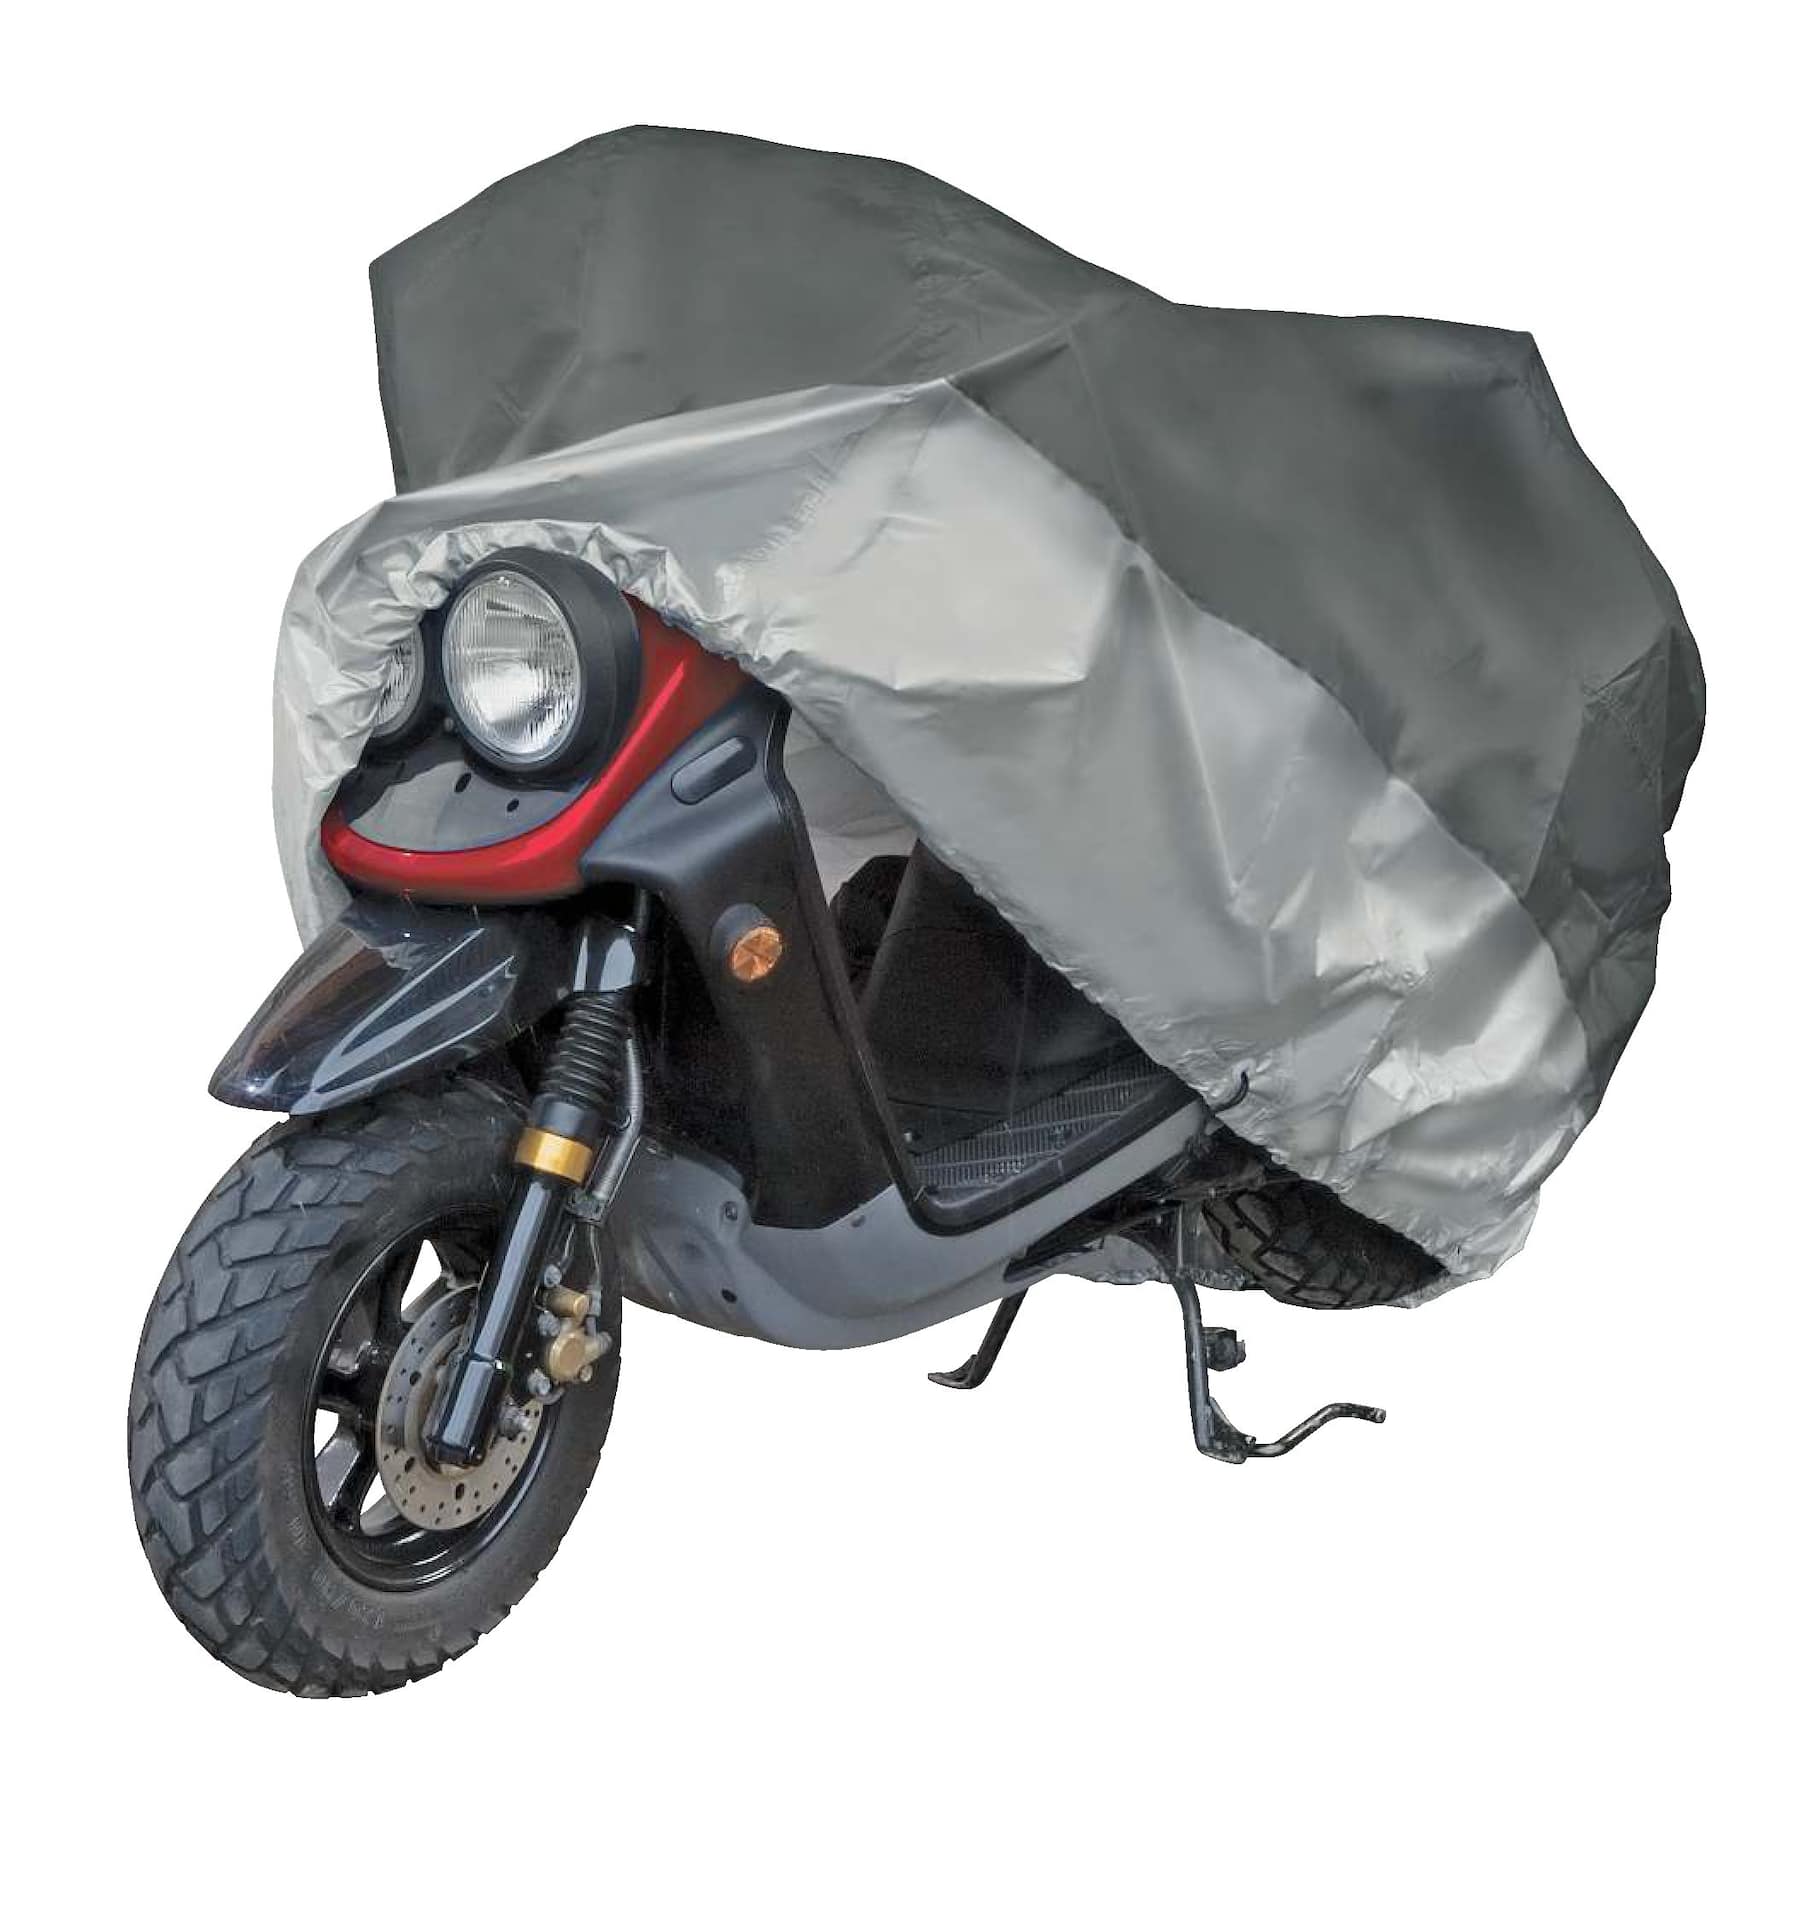 Housse scooter / moto gonflable Air Car-Cover